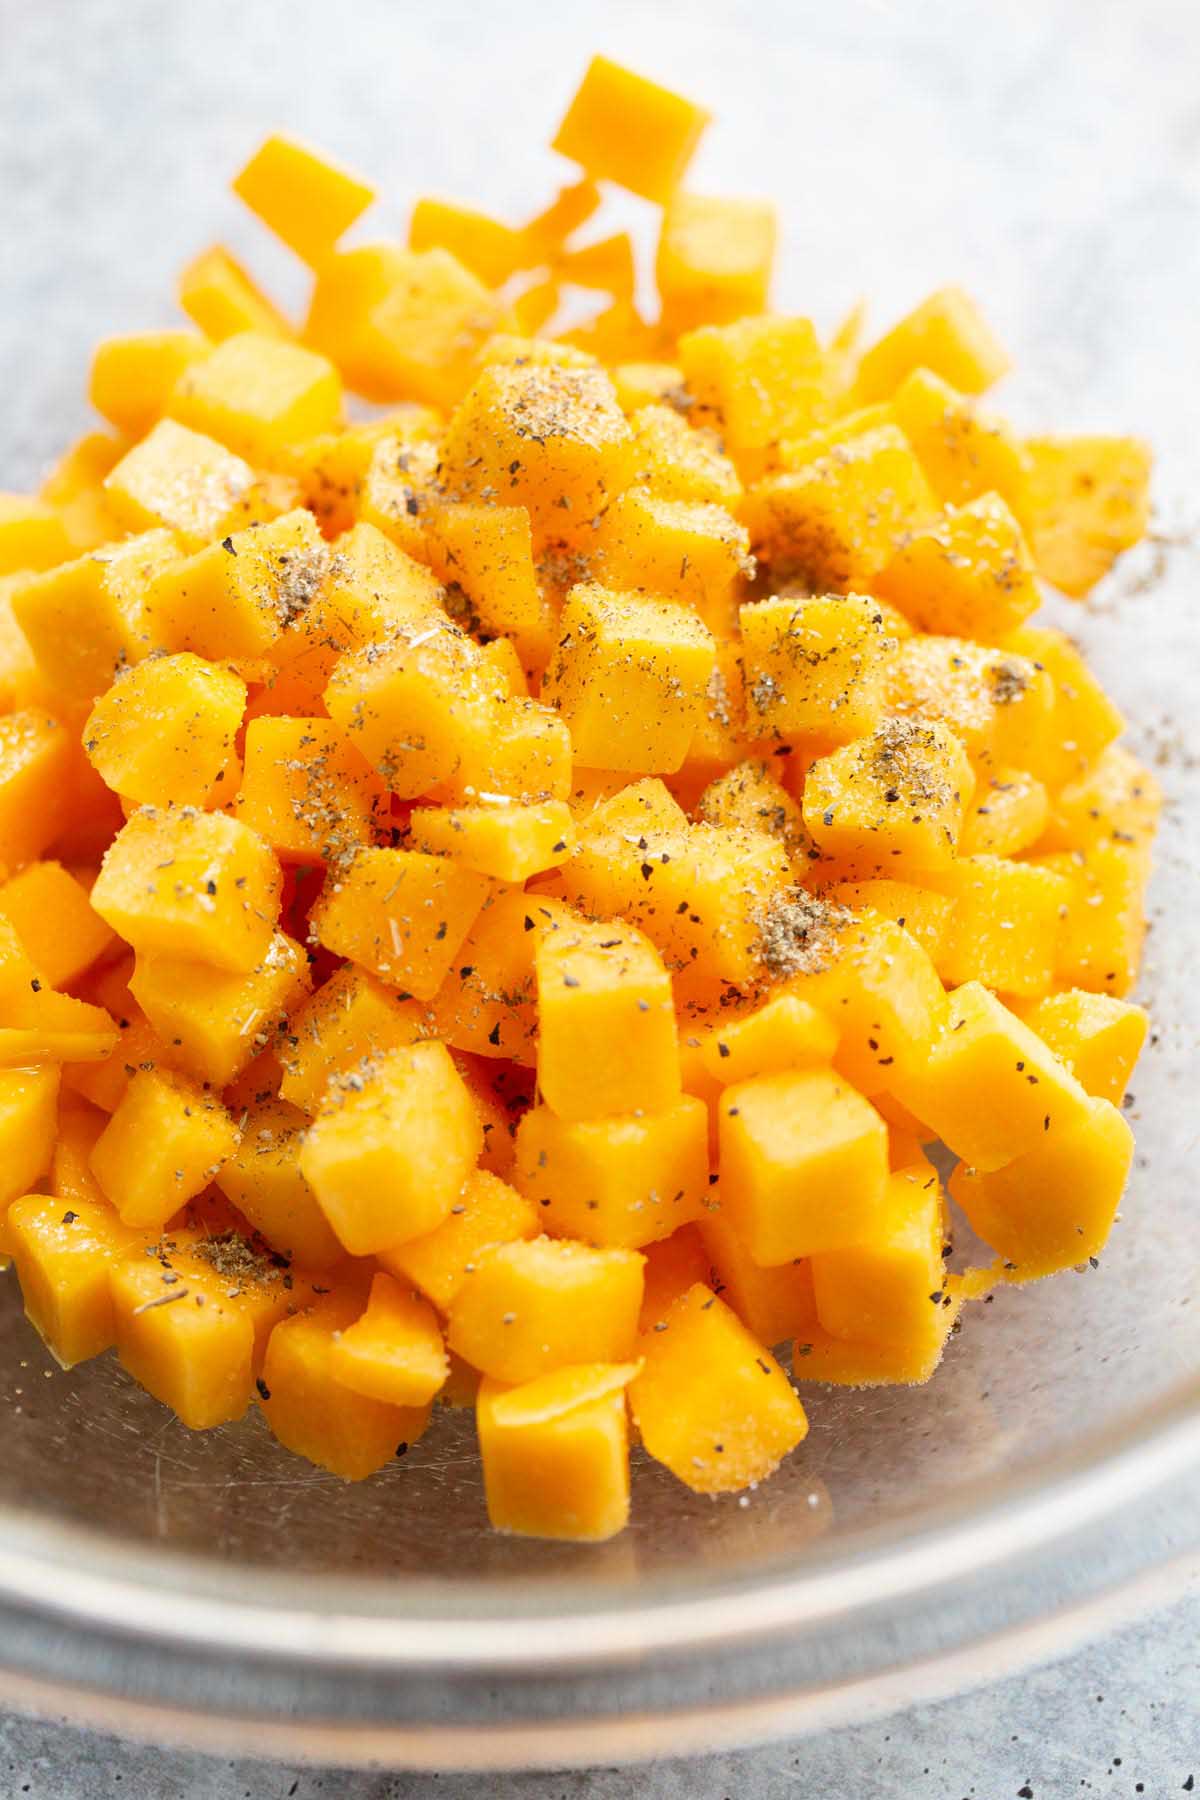 Butternut squash cubes in a bowl with seasoning